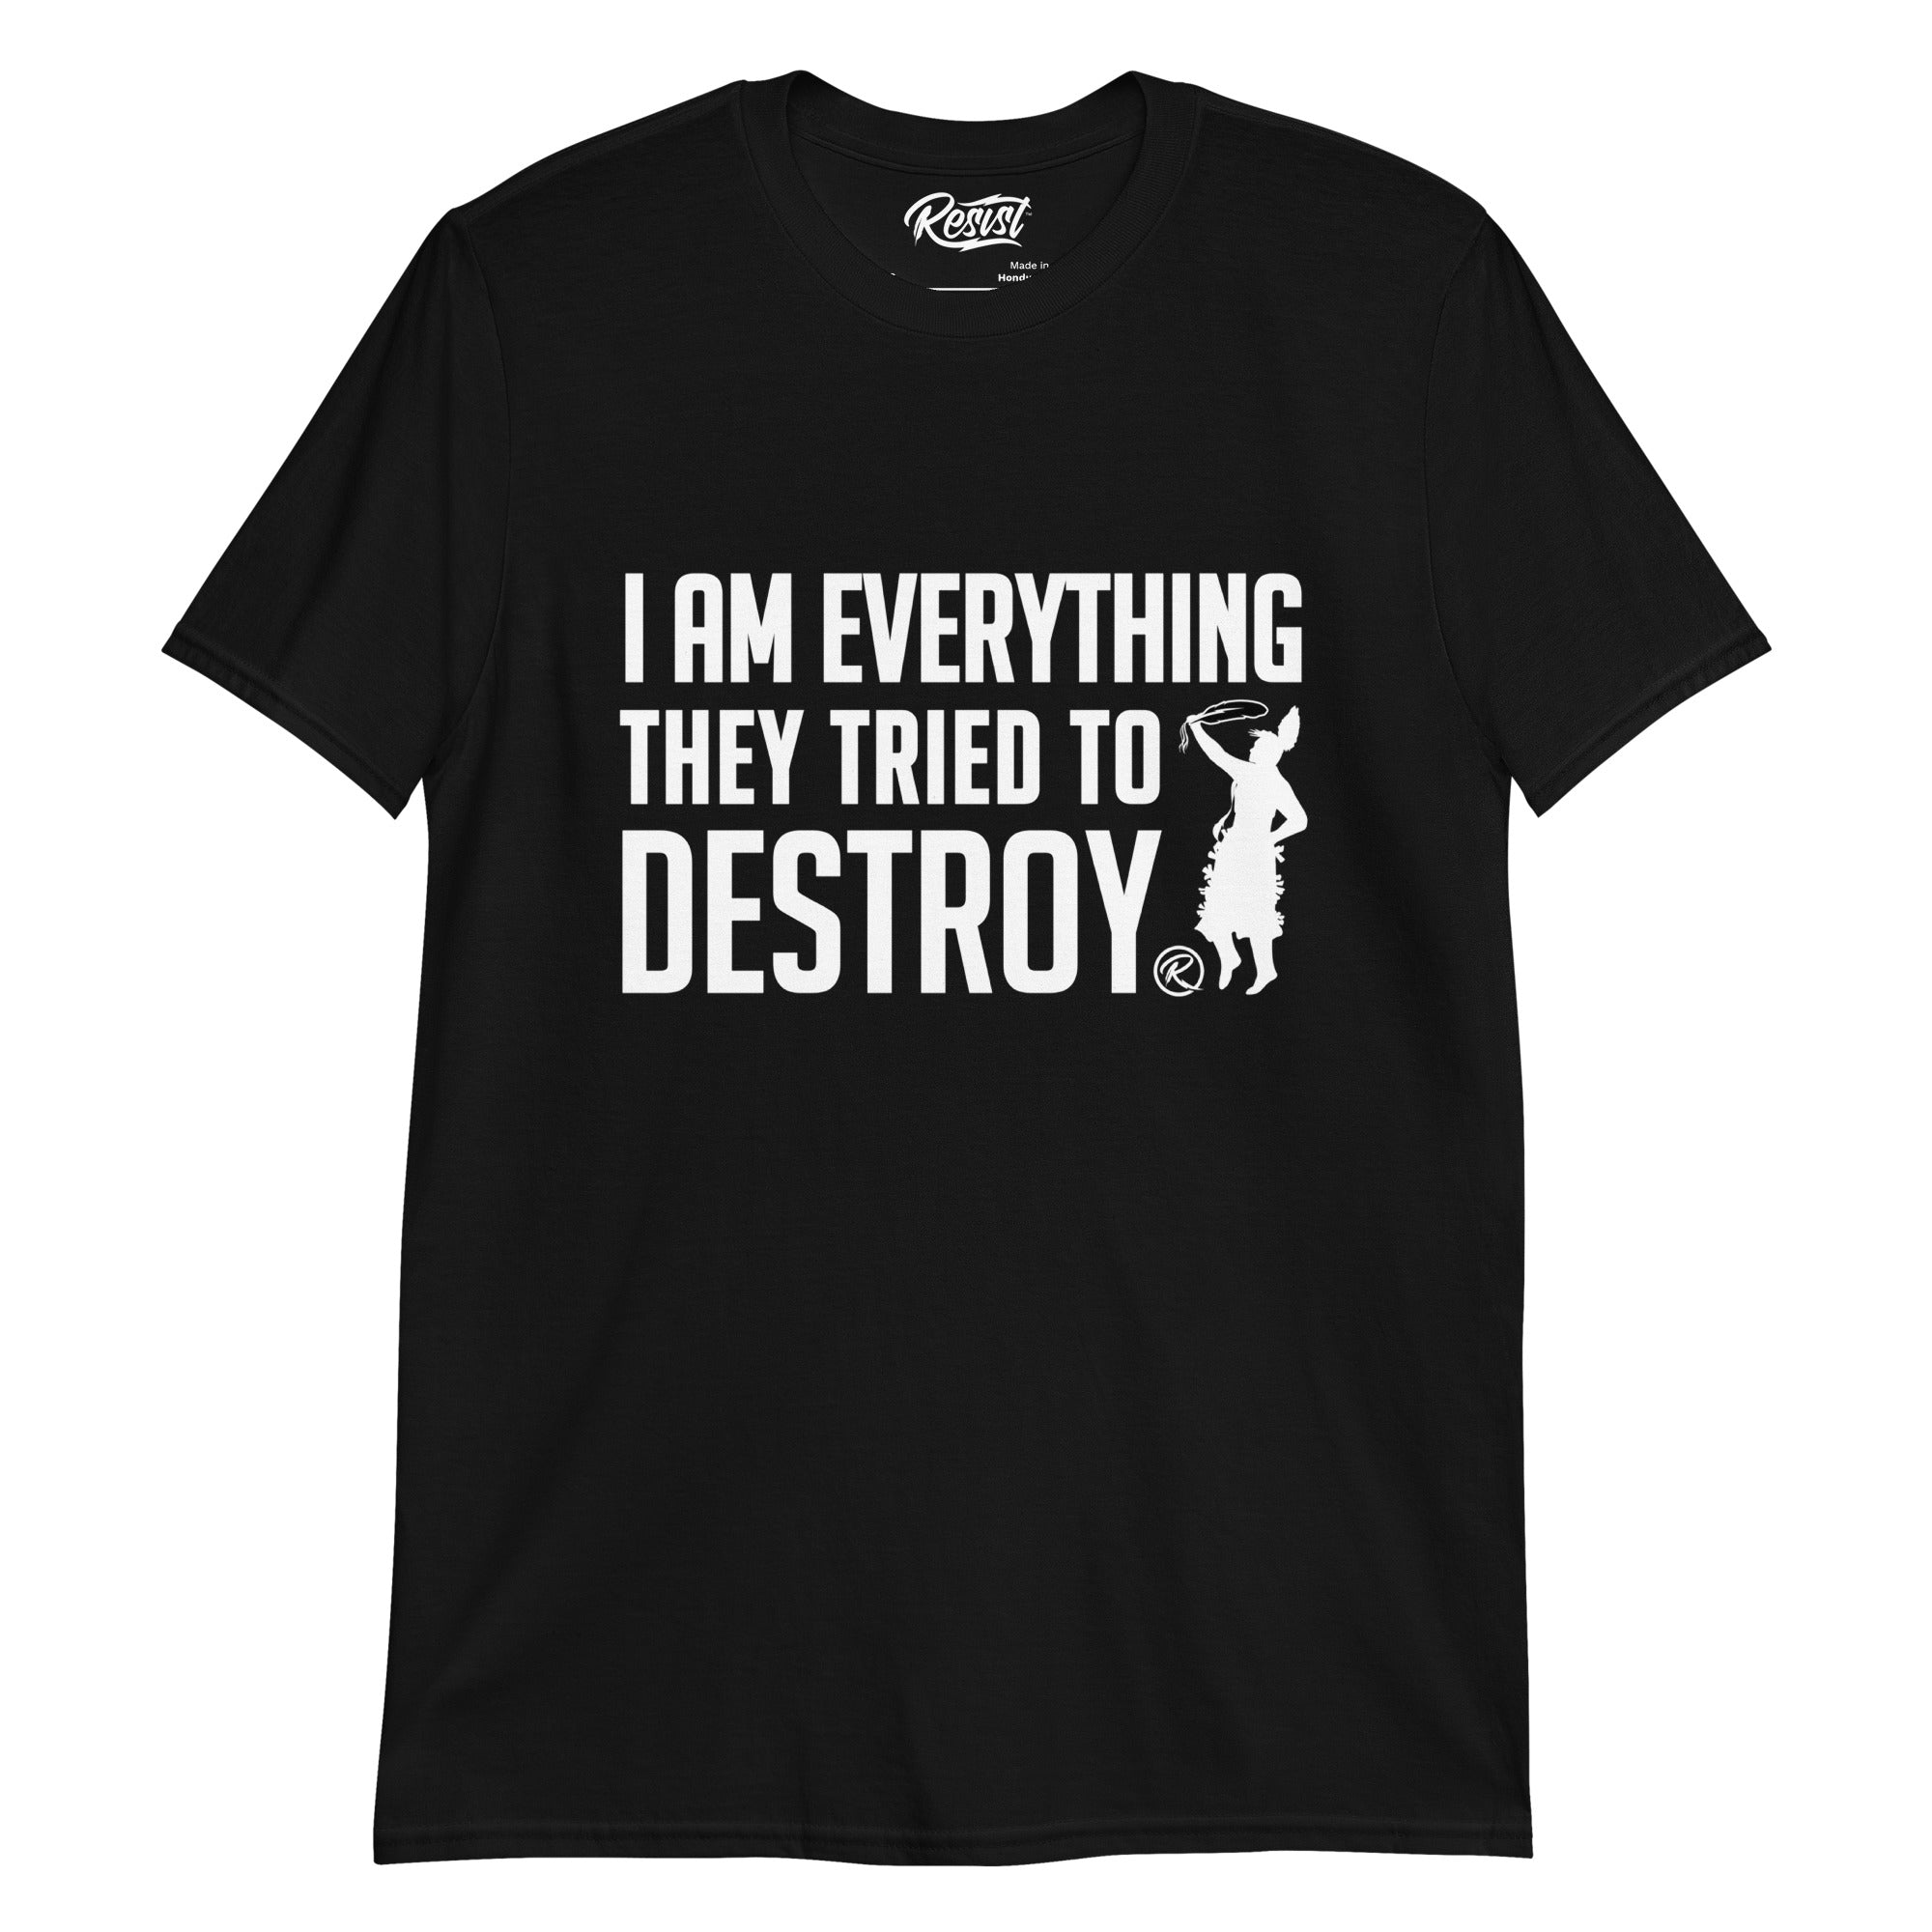 I Am Everything They Tried to Destroy T-shirt